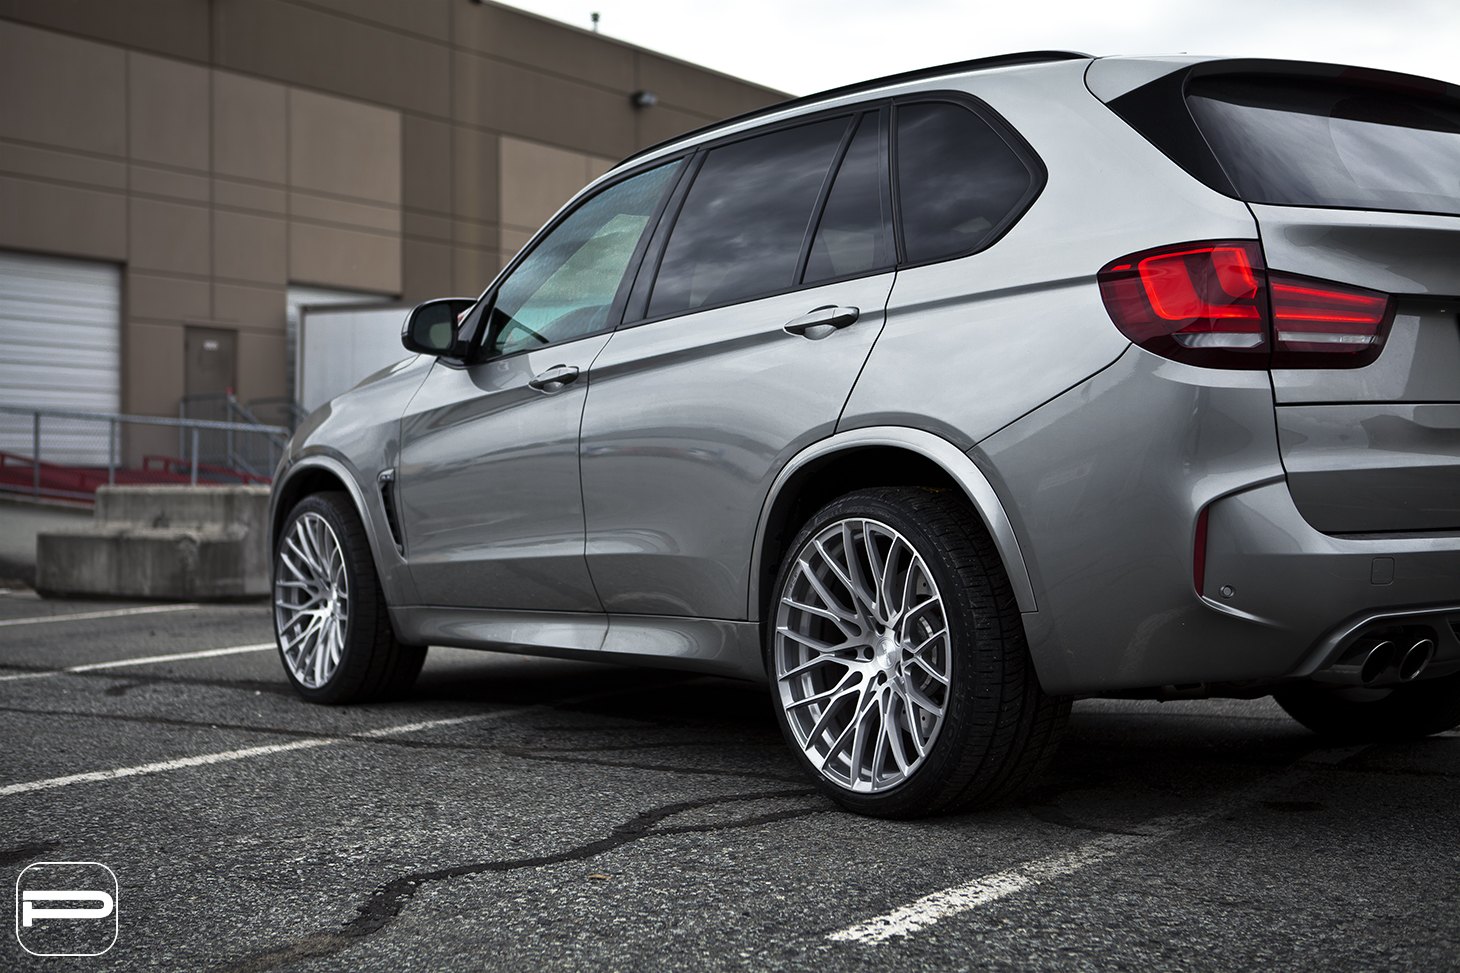 Aftermarket LED Taillights on Gray BMW X5 - Photo by PUR Wheels